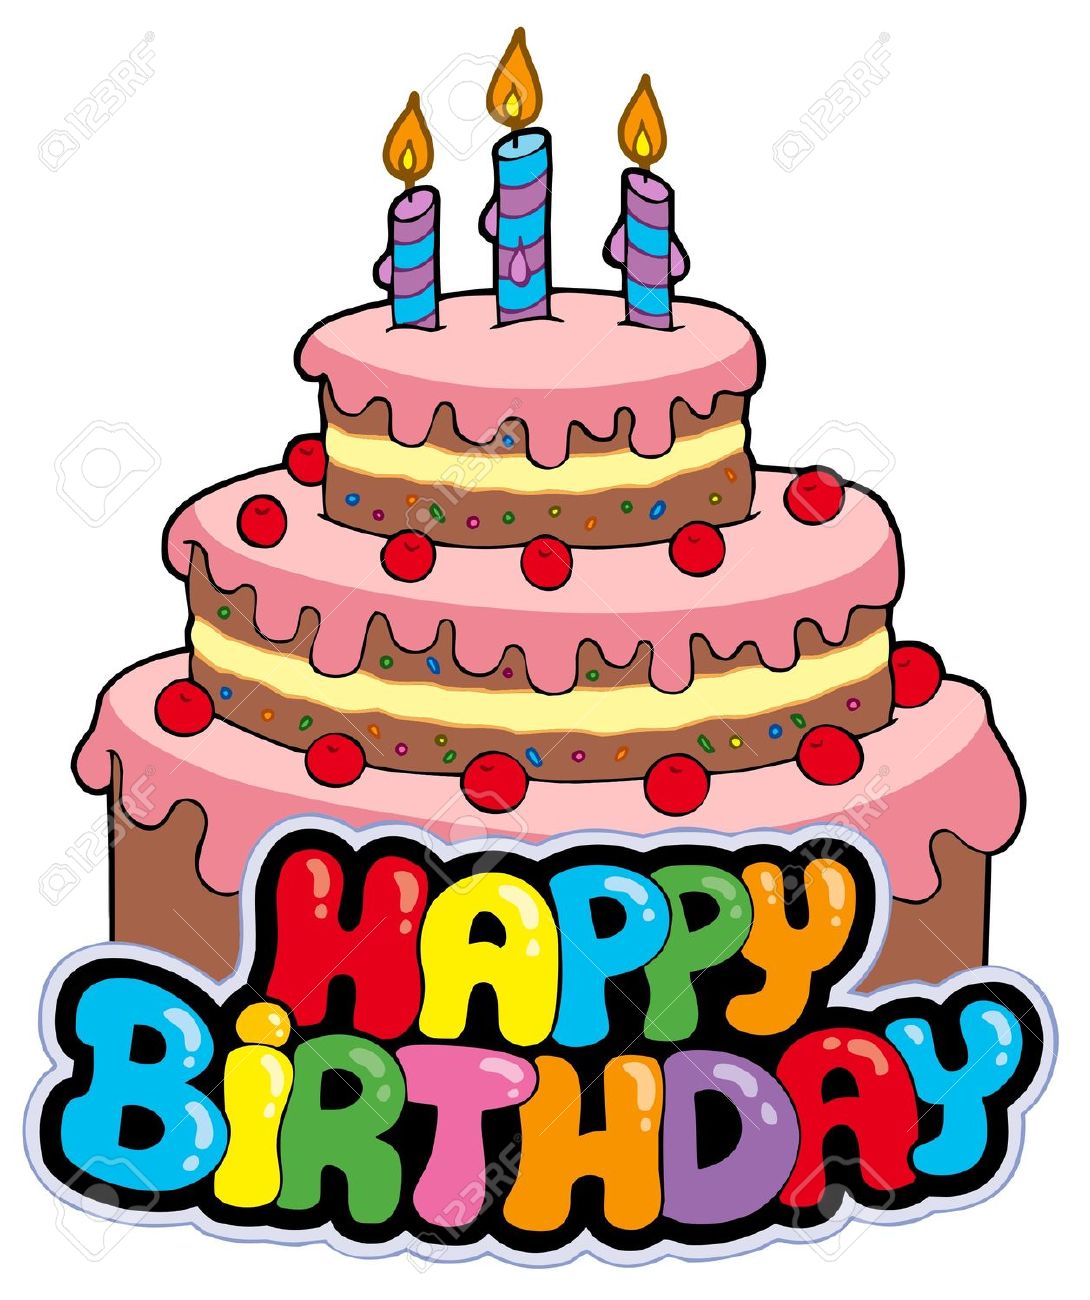 Cake clipart on glitter graphics birthday cakes and image 2